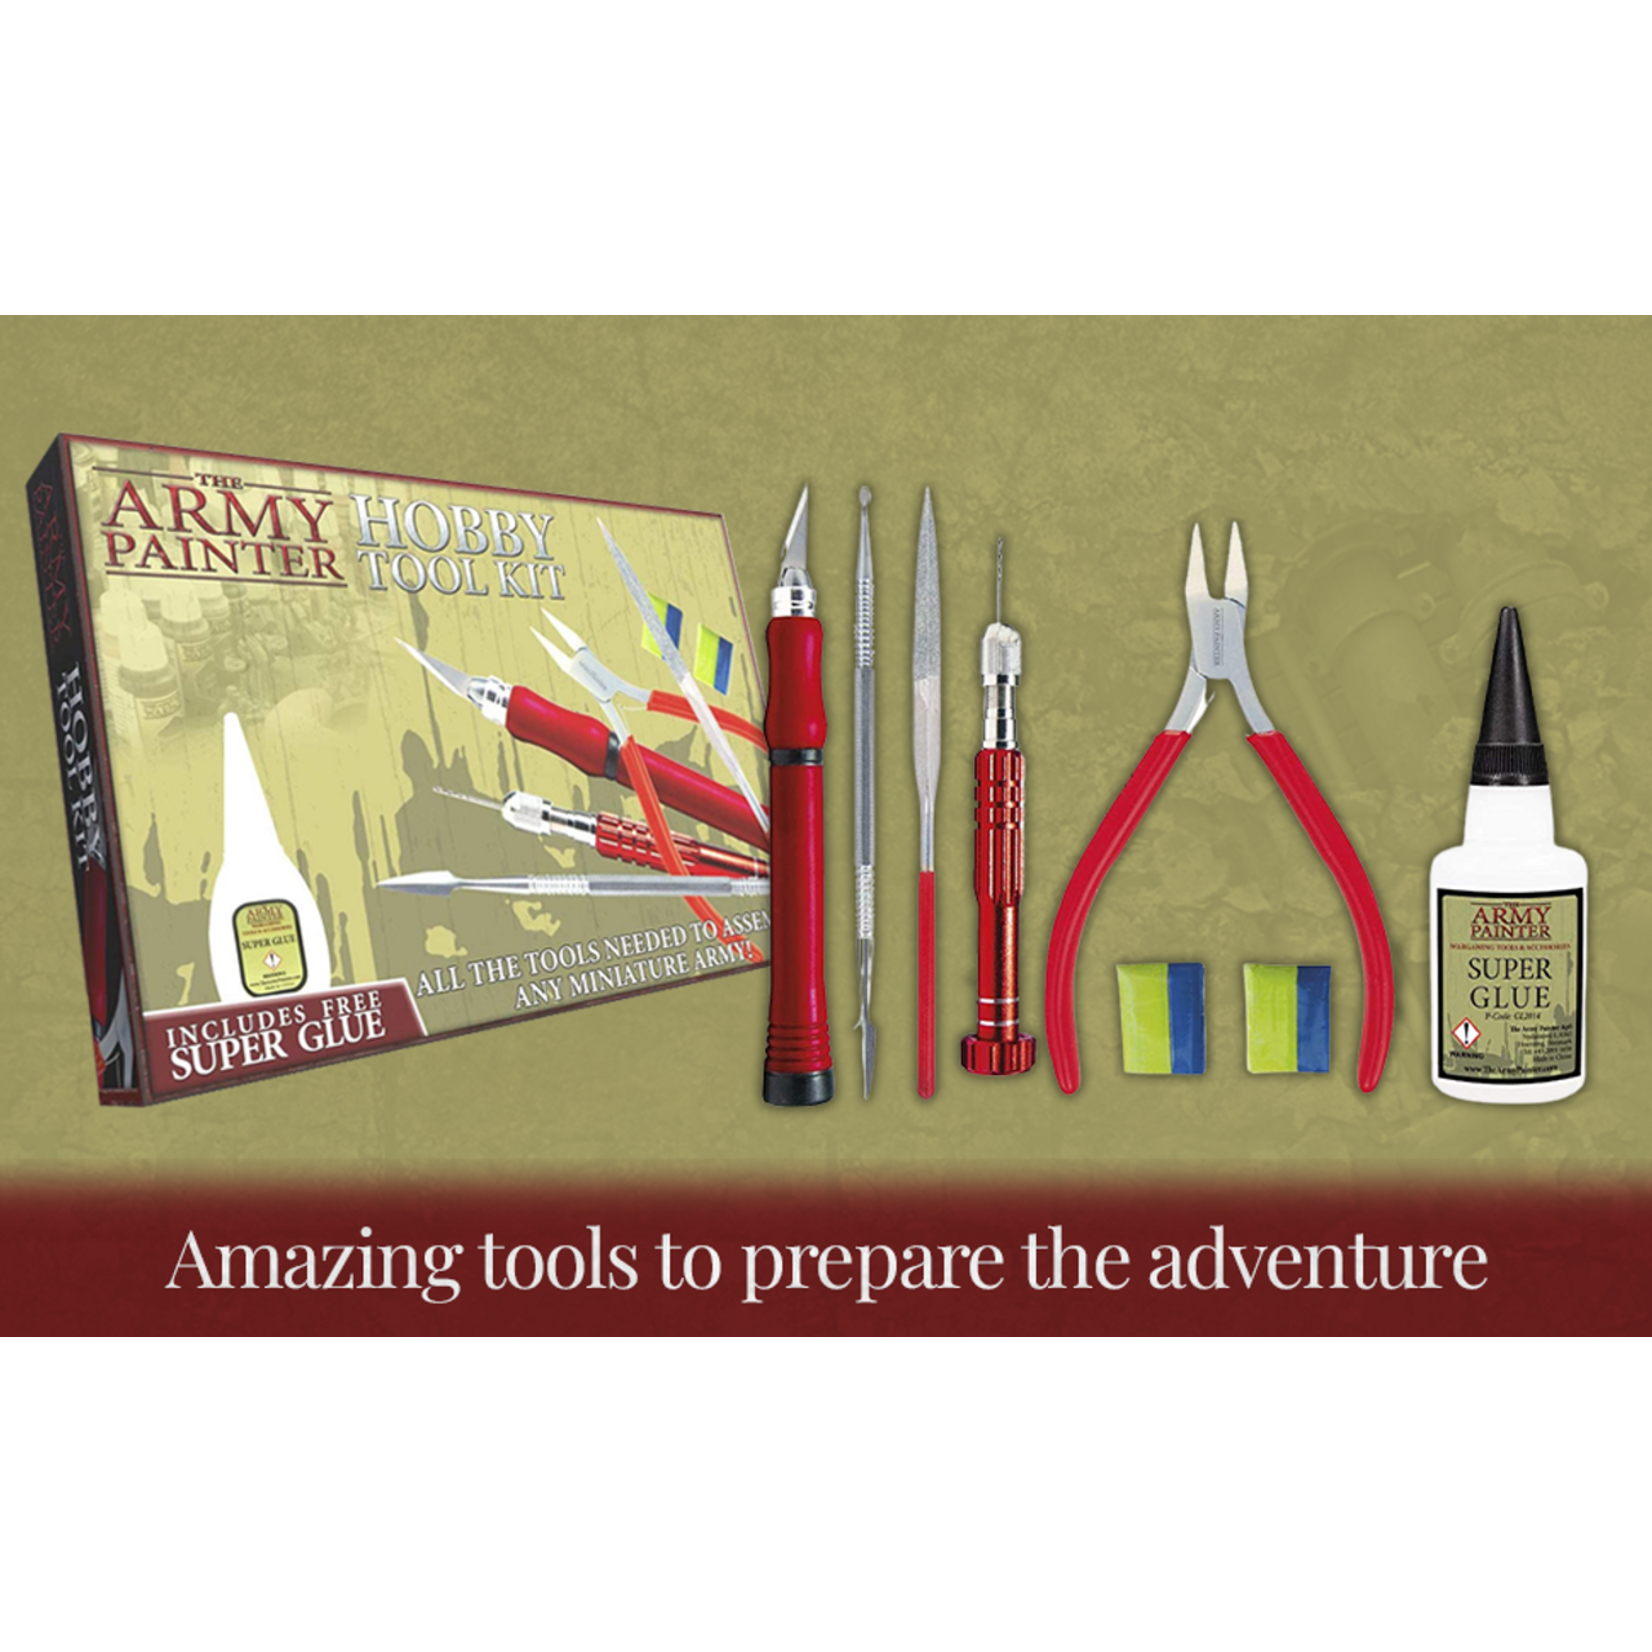 The Army Painter Army Painter Hobby Tool Kit